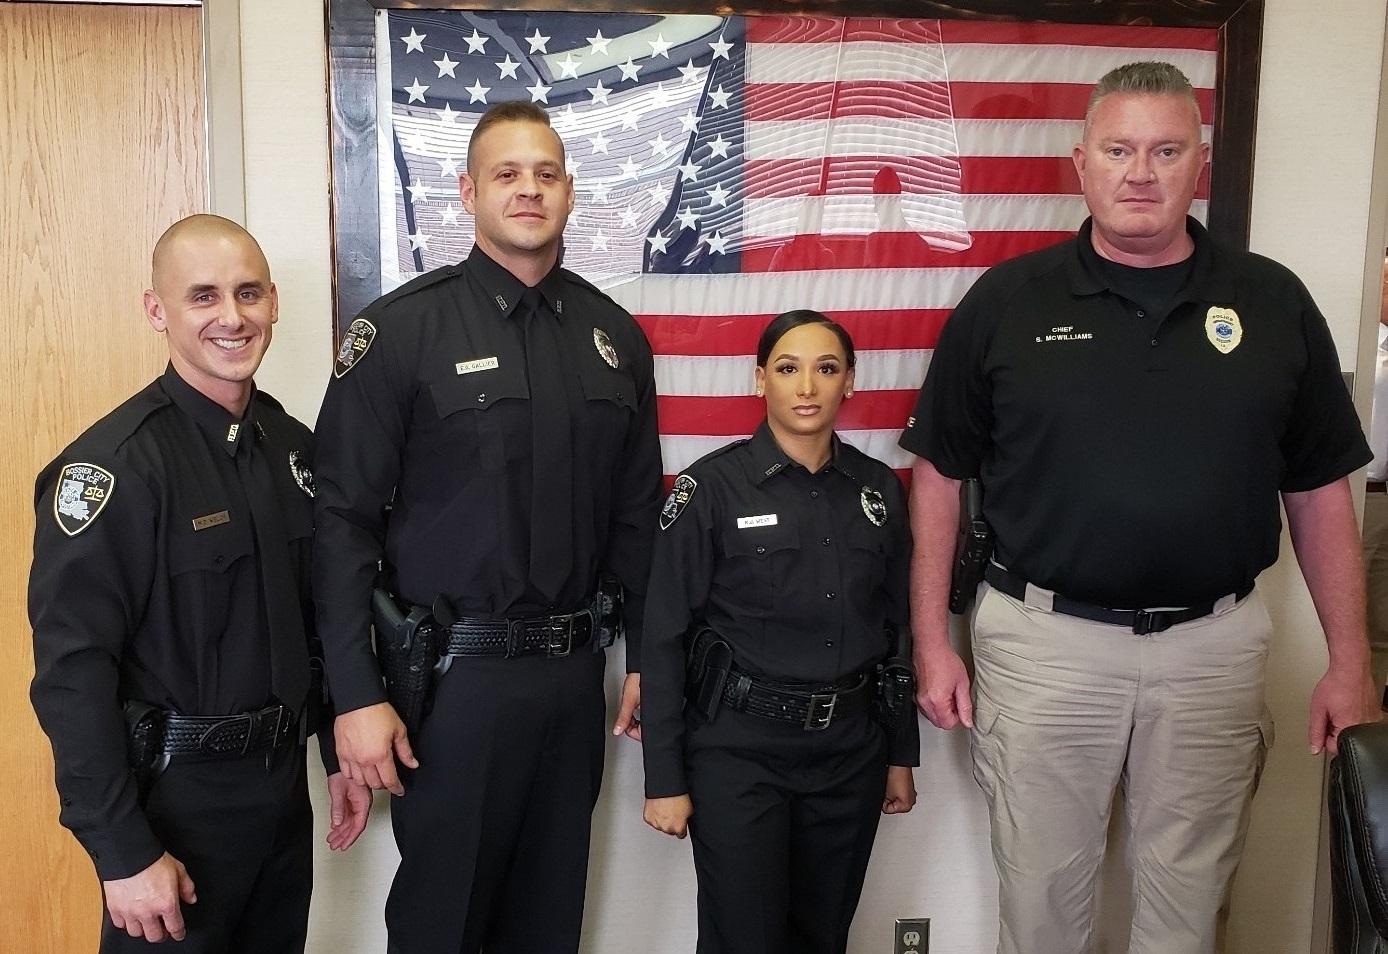 New Bossier City Police Officers Sworn In The Inquisitor